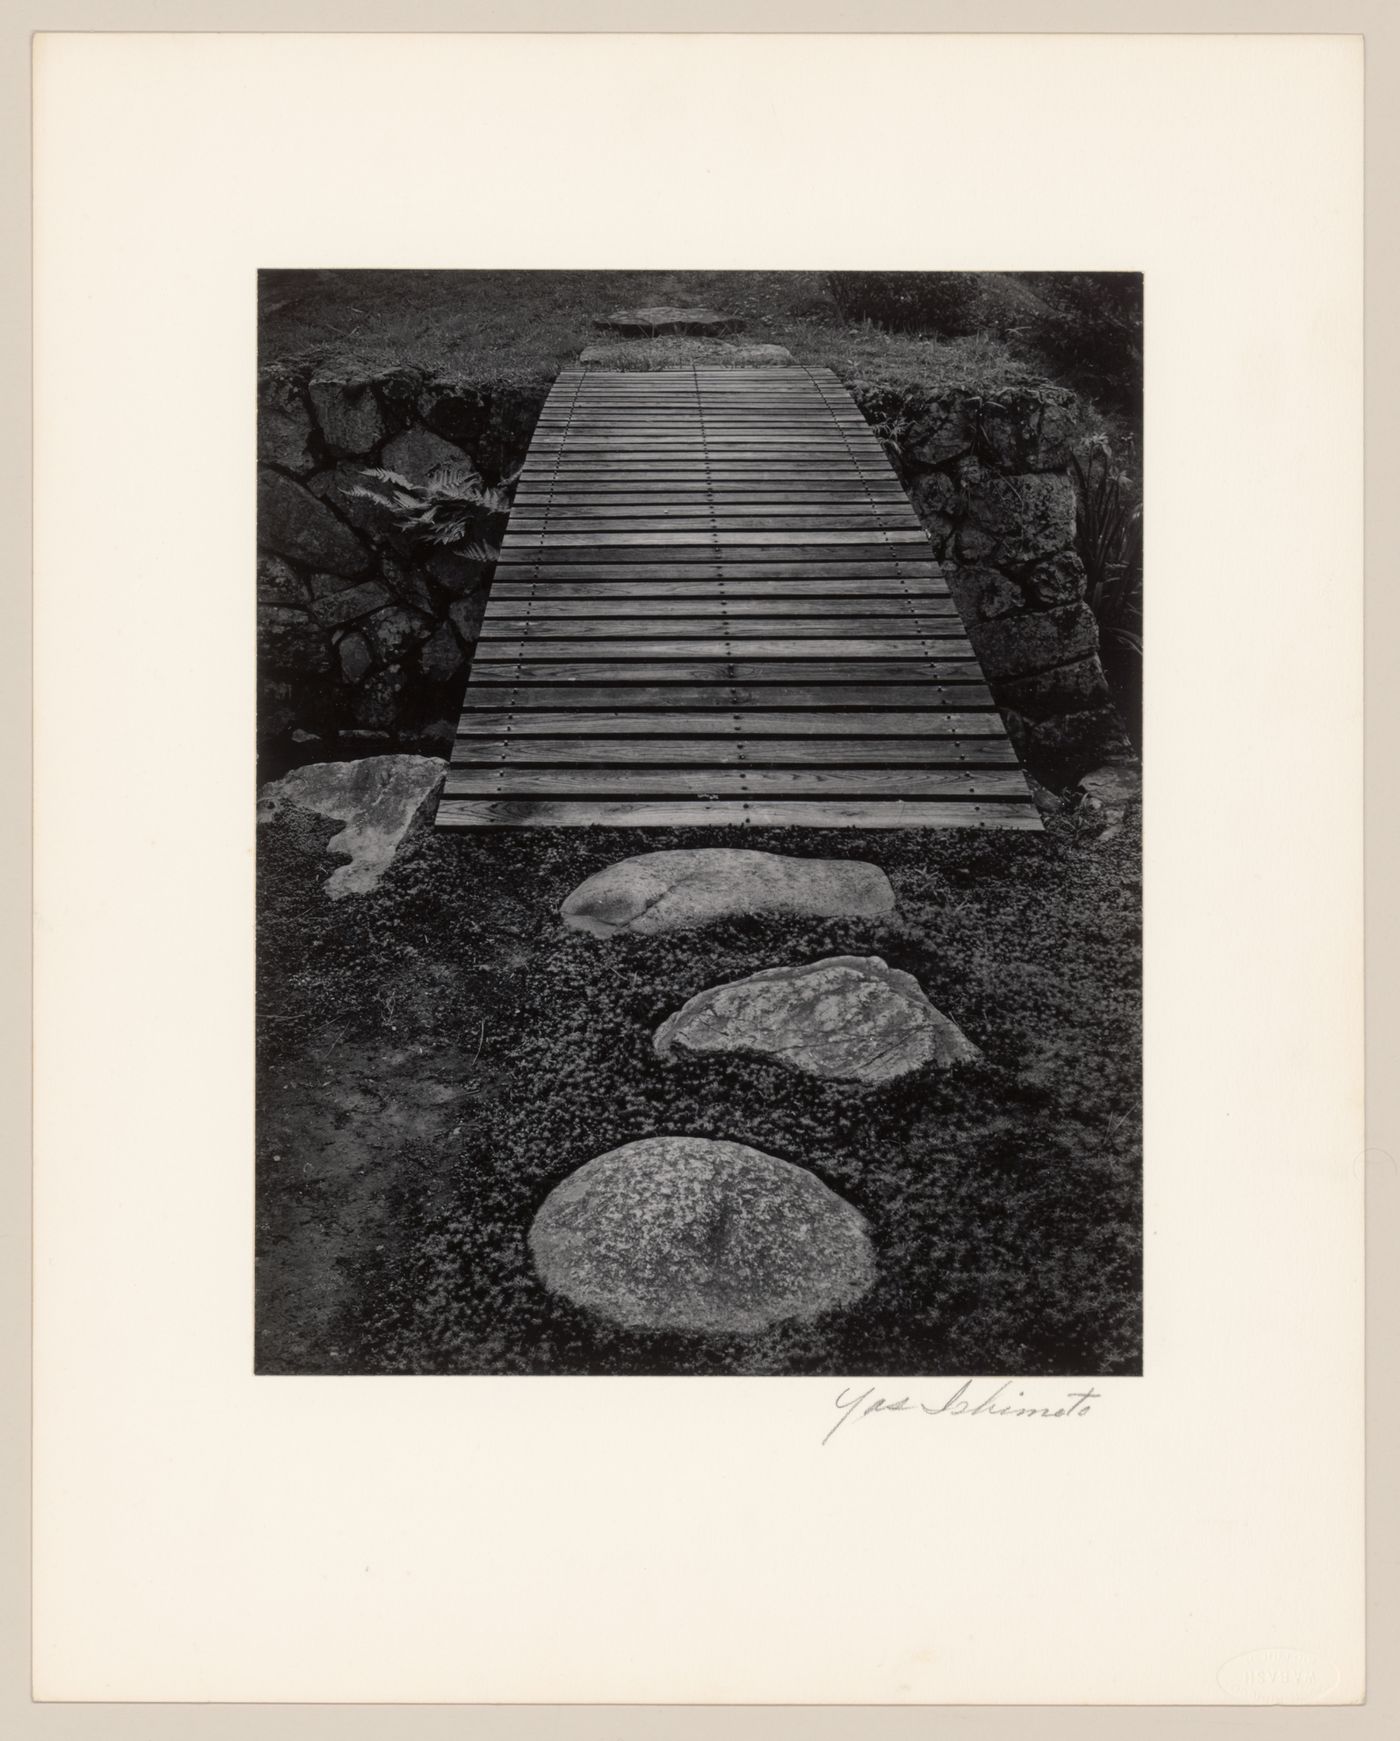 View of stepping-stones and a wooden footbridge leading to the Island of Immortals (also known as the Middle Islands), Katsura Rikyu (also known as Katsura Imperial Villa), Kyoto, Japan